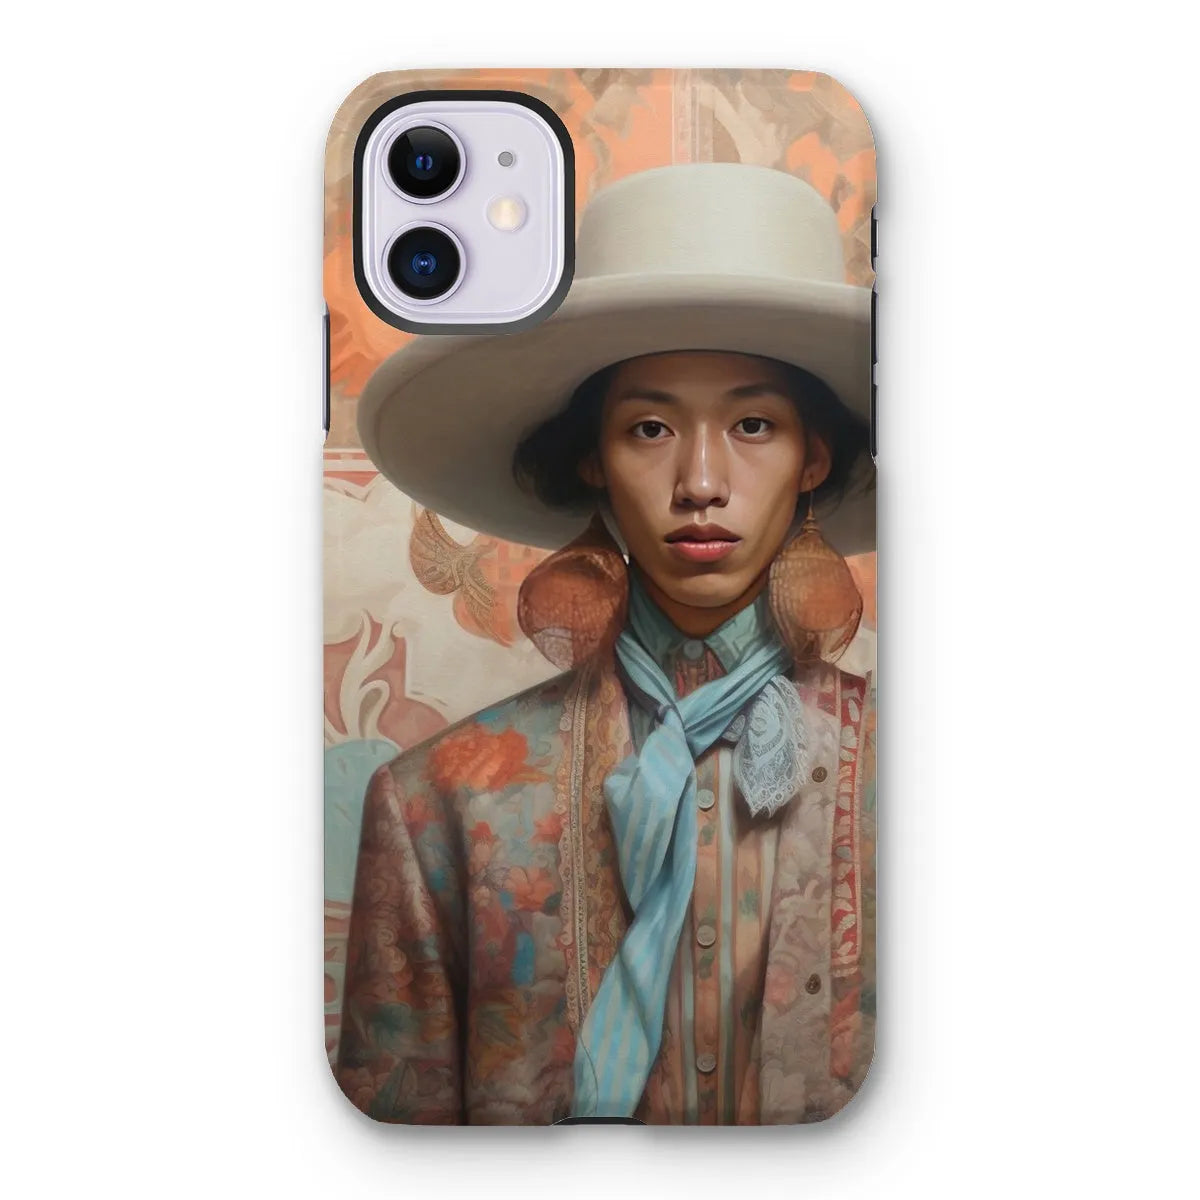 Iyaan The Gay Cowboy - Dandy Gay Aesthetic Art Phone Case - Iphone 11 / Matte - Mobile Phone Cases - Aesthetic Art